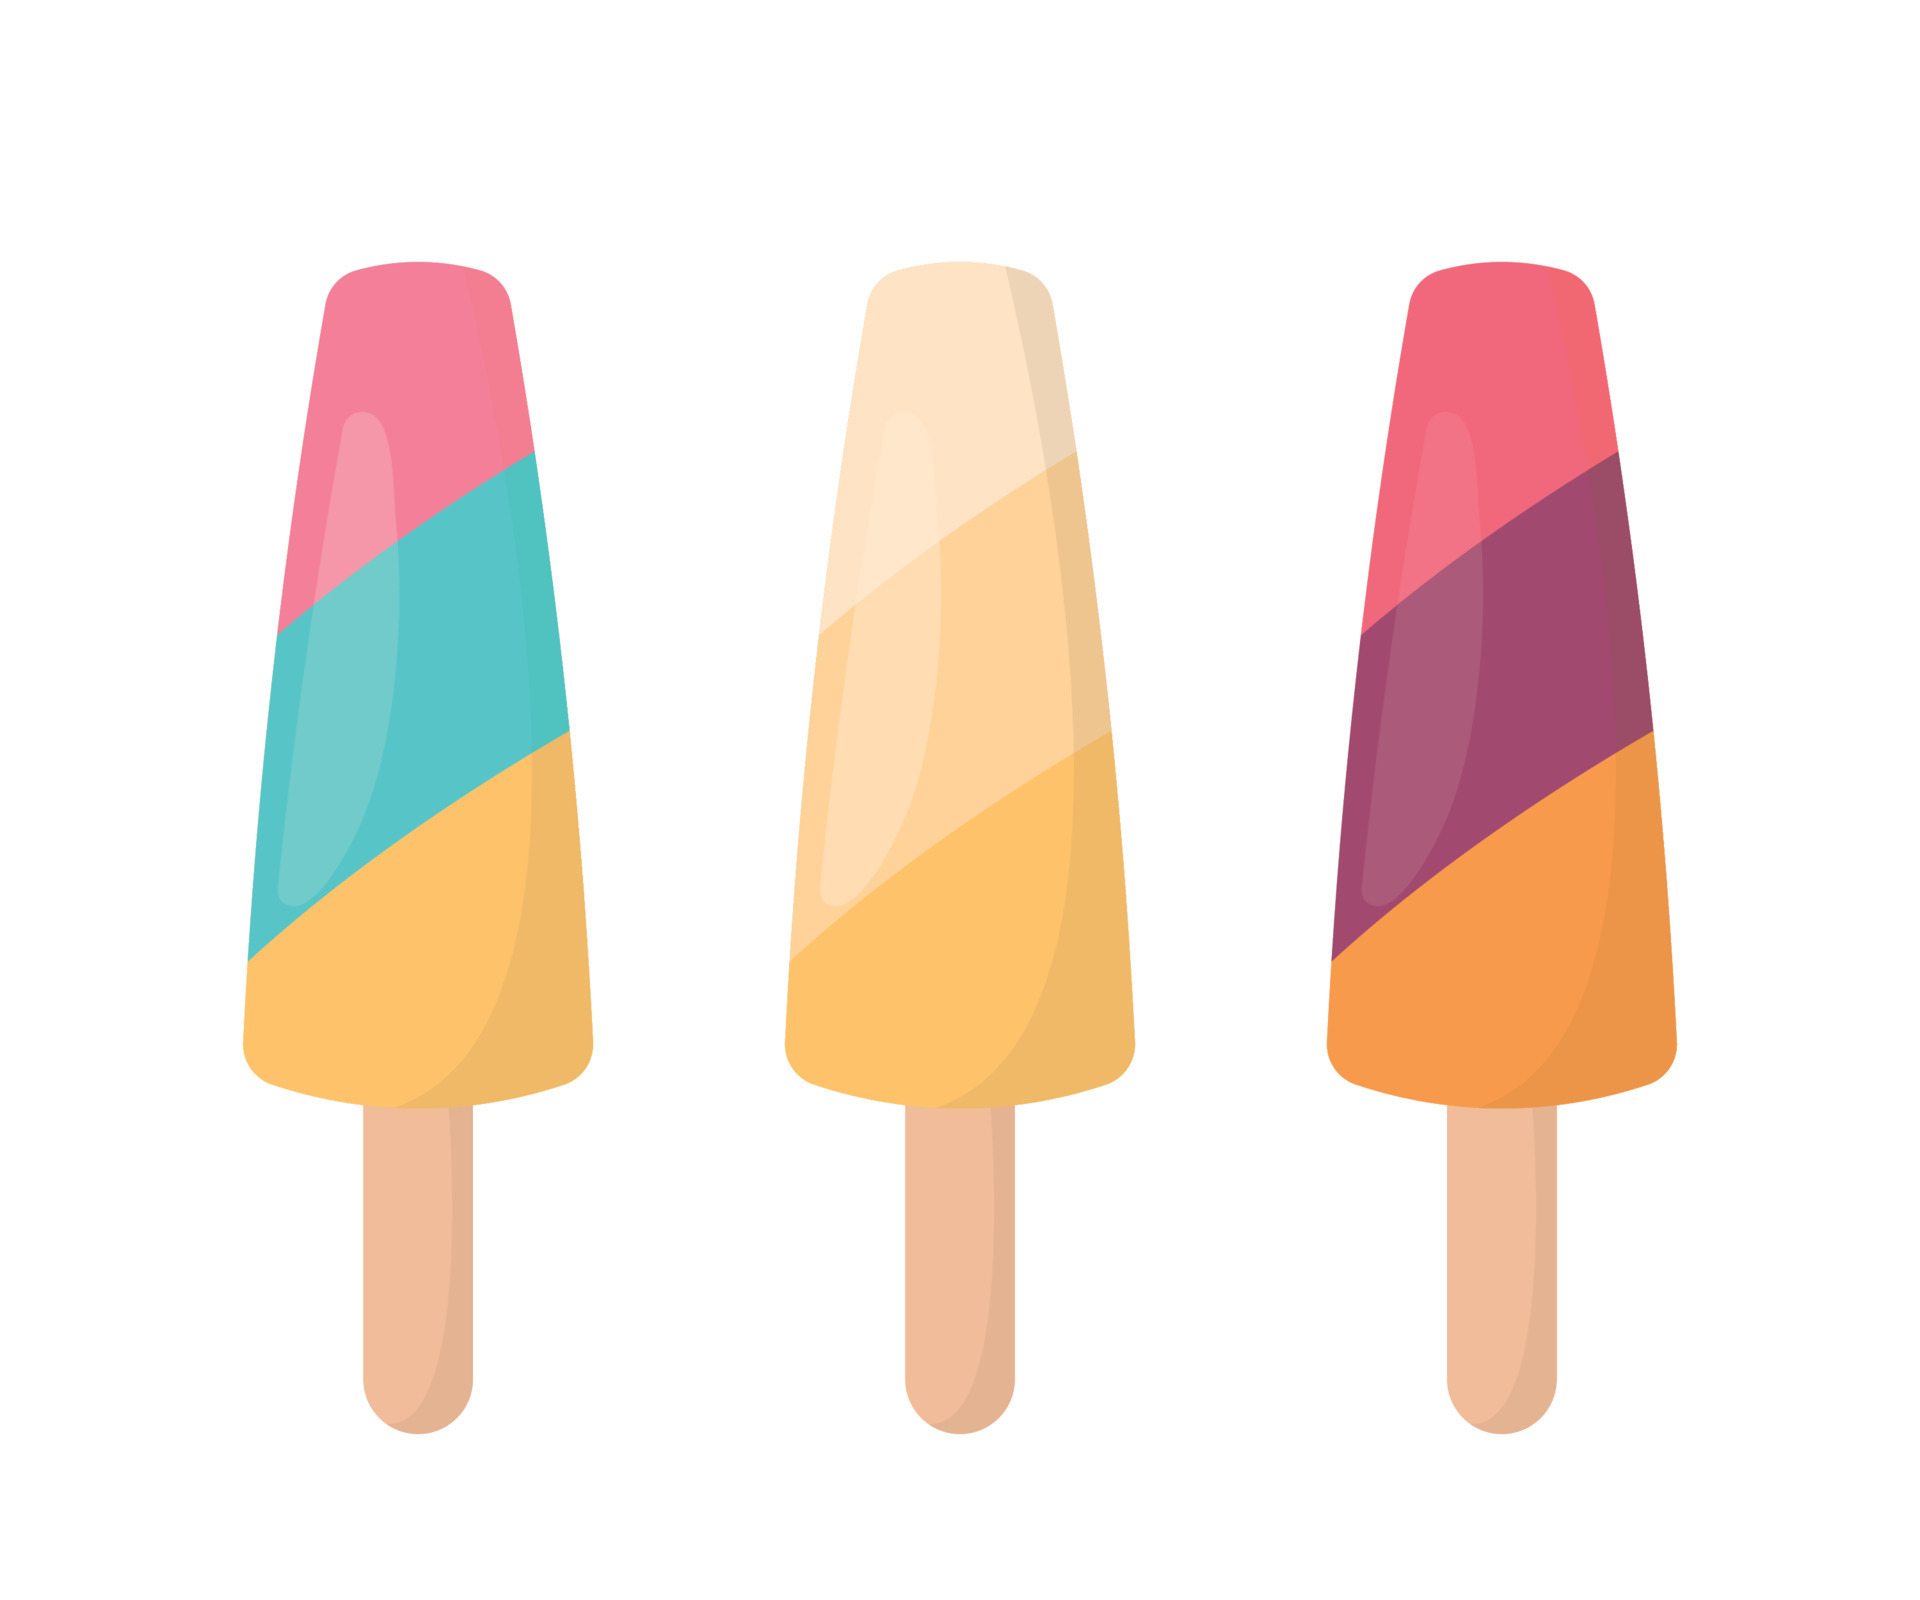 ICE CREAM CLIPART Popsicle and Frozen Dessert Summer Clipart